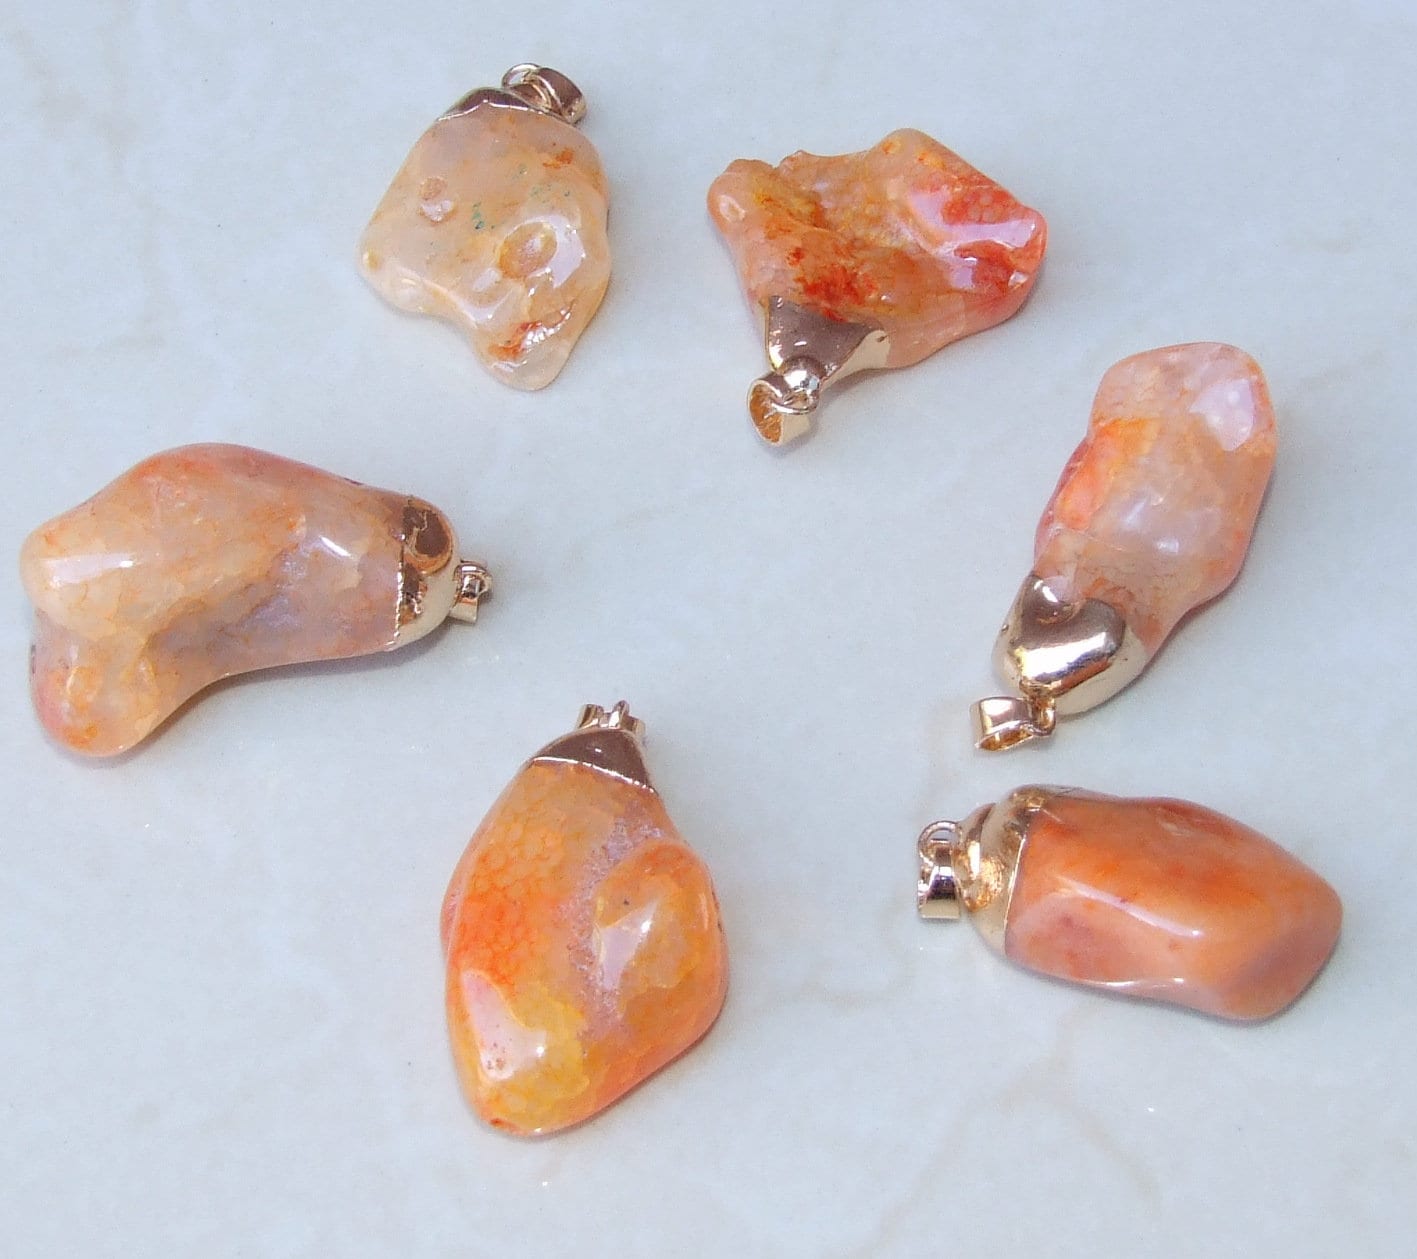 Orange Agate Nugget Pendant - Gemstone Pendant - Natural - Polished - Gold Plated Cap and Bail - 35mm to 40mm